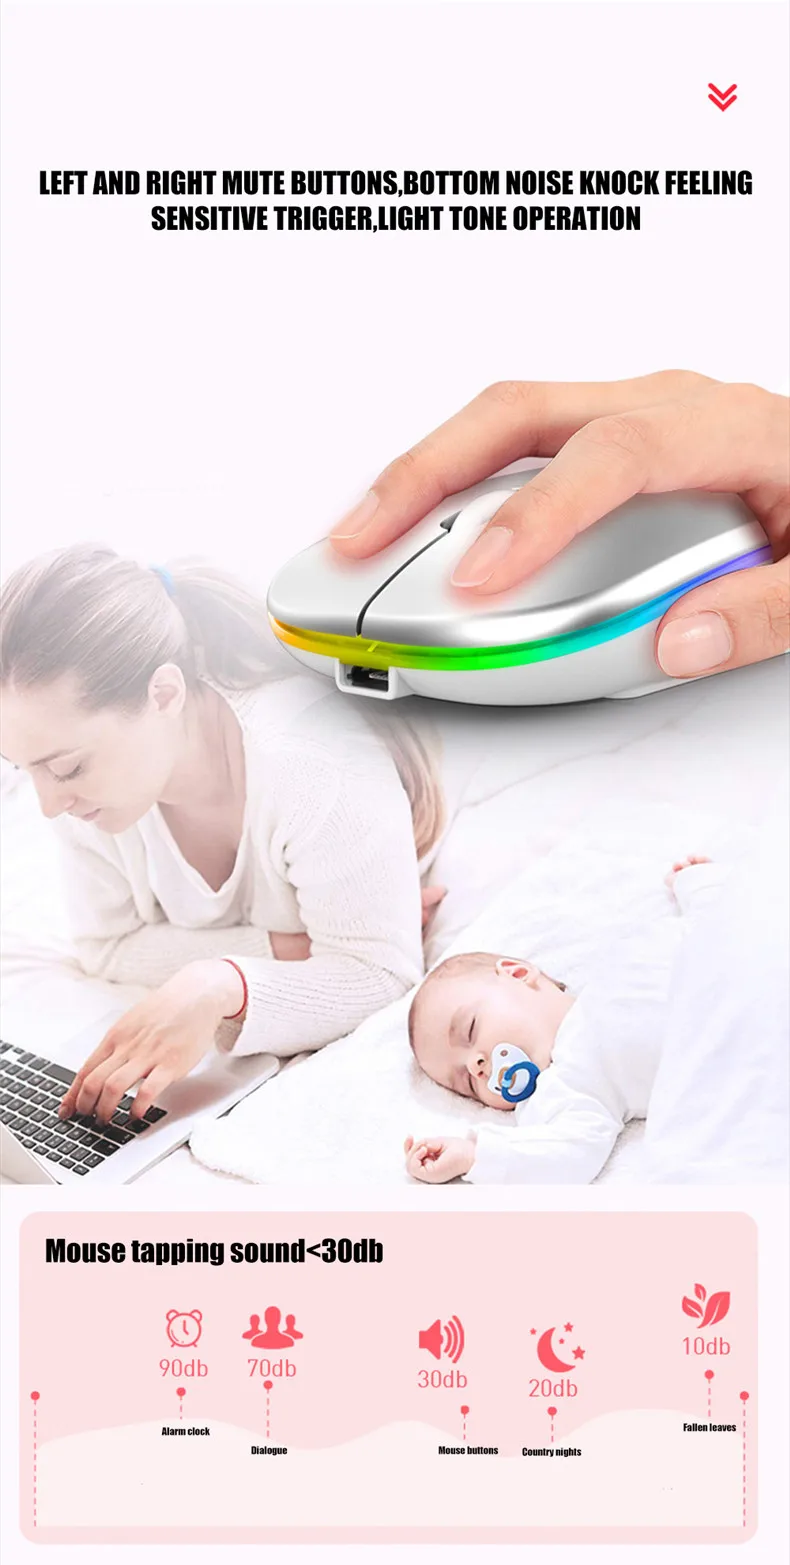 pc gaming mouse USB Rechargeable RGB Mouse For Laptop Computer PC Macbook Gaming Mouse 2.4GHz 1600DPI best pc mouse